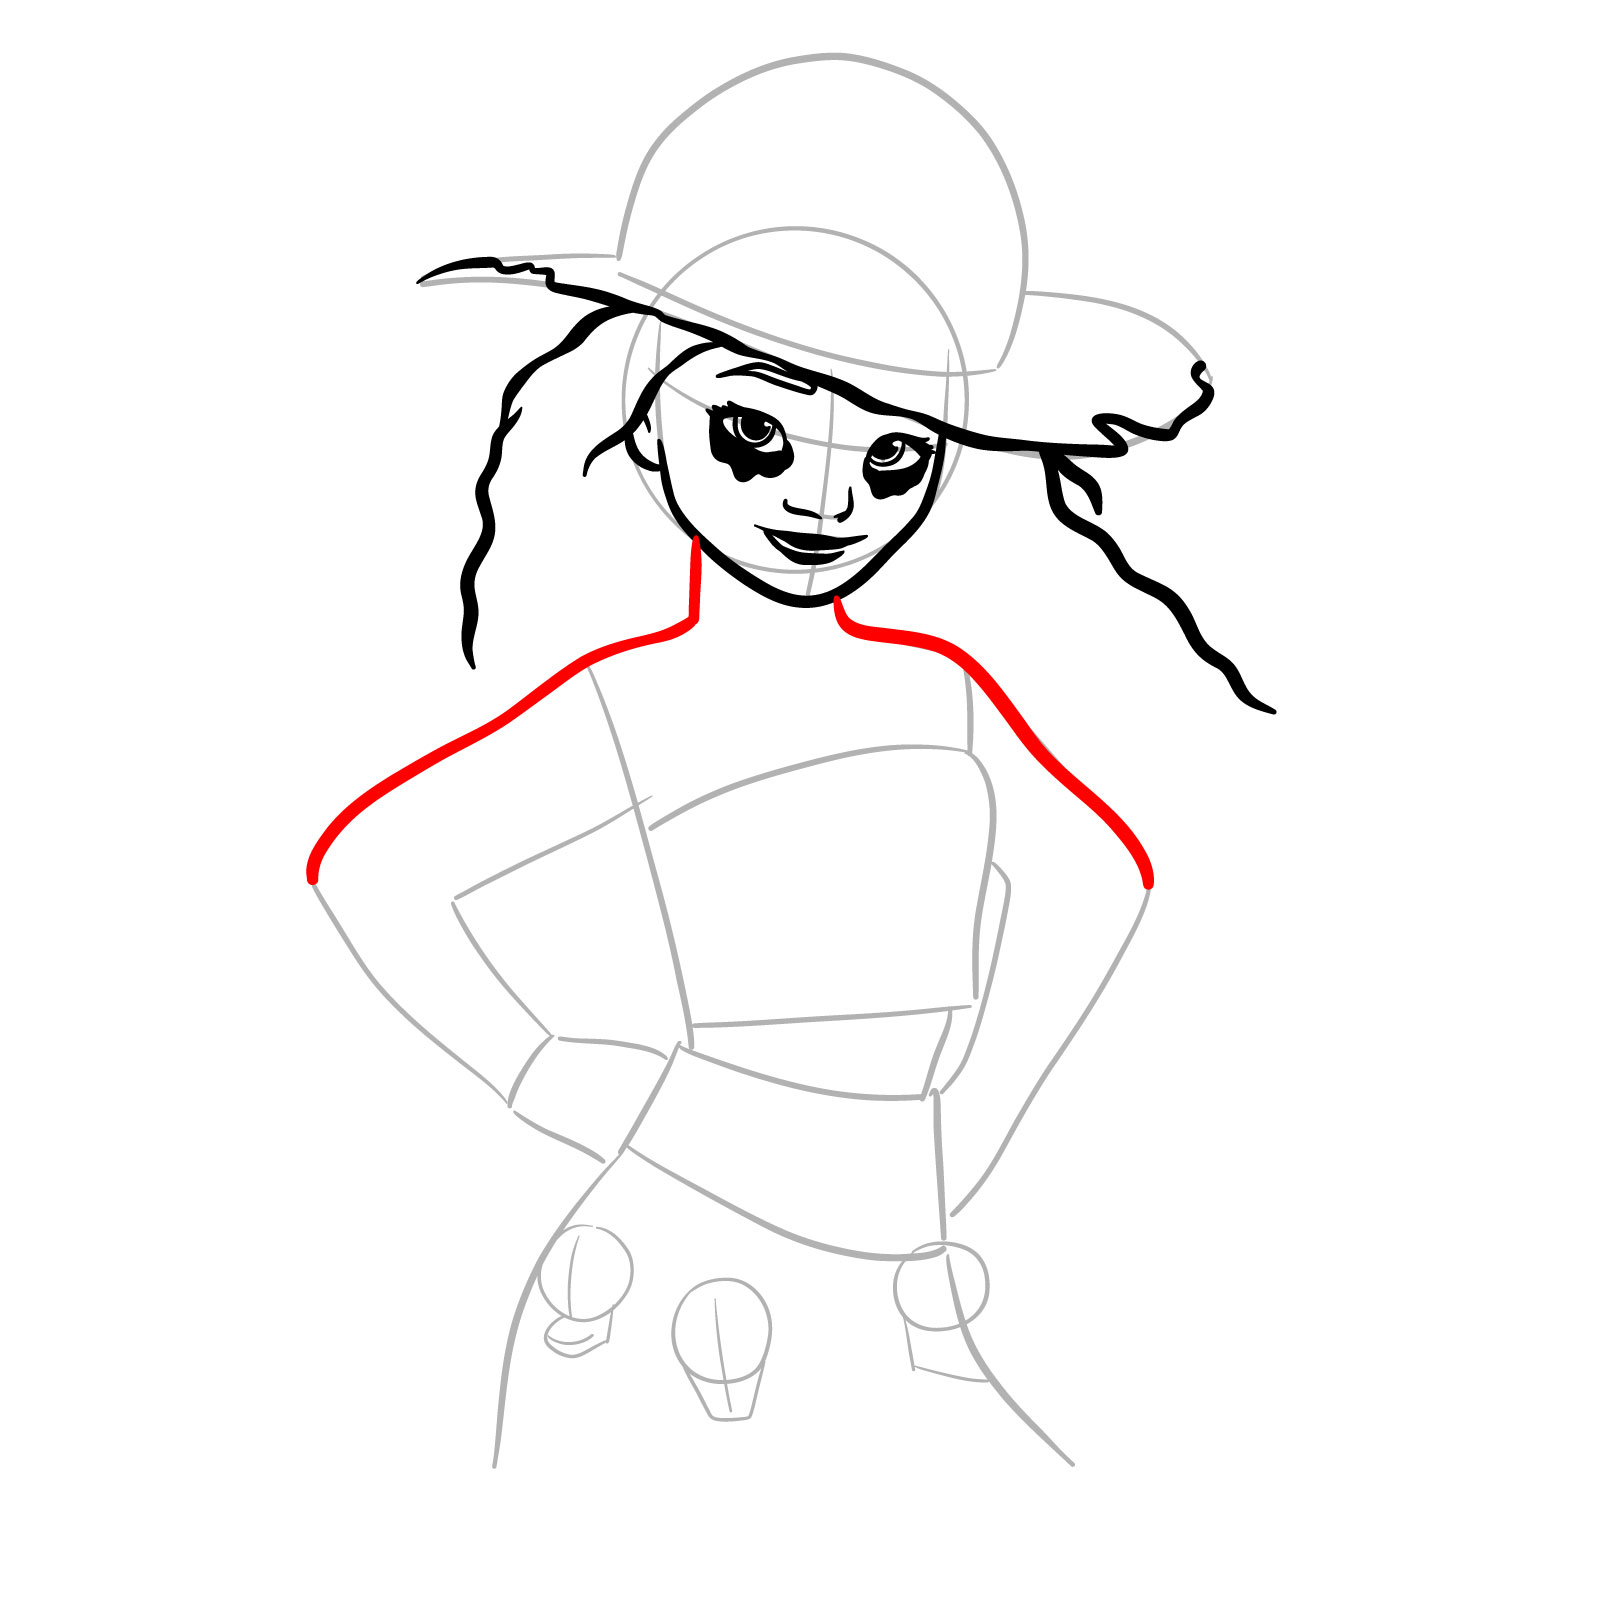 How to Draw Halloween Moana as a Staw Hat Pirate - step 12